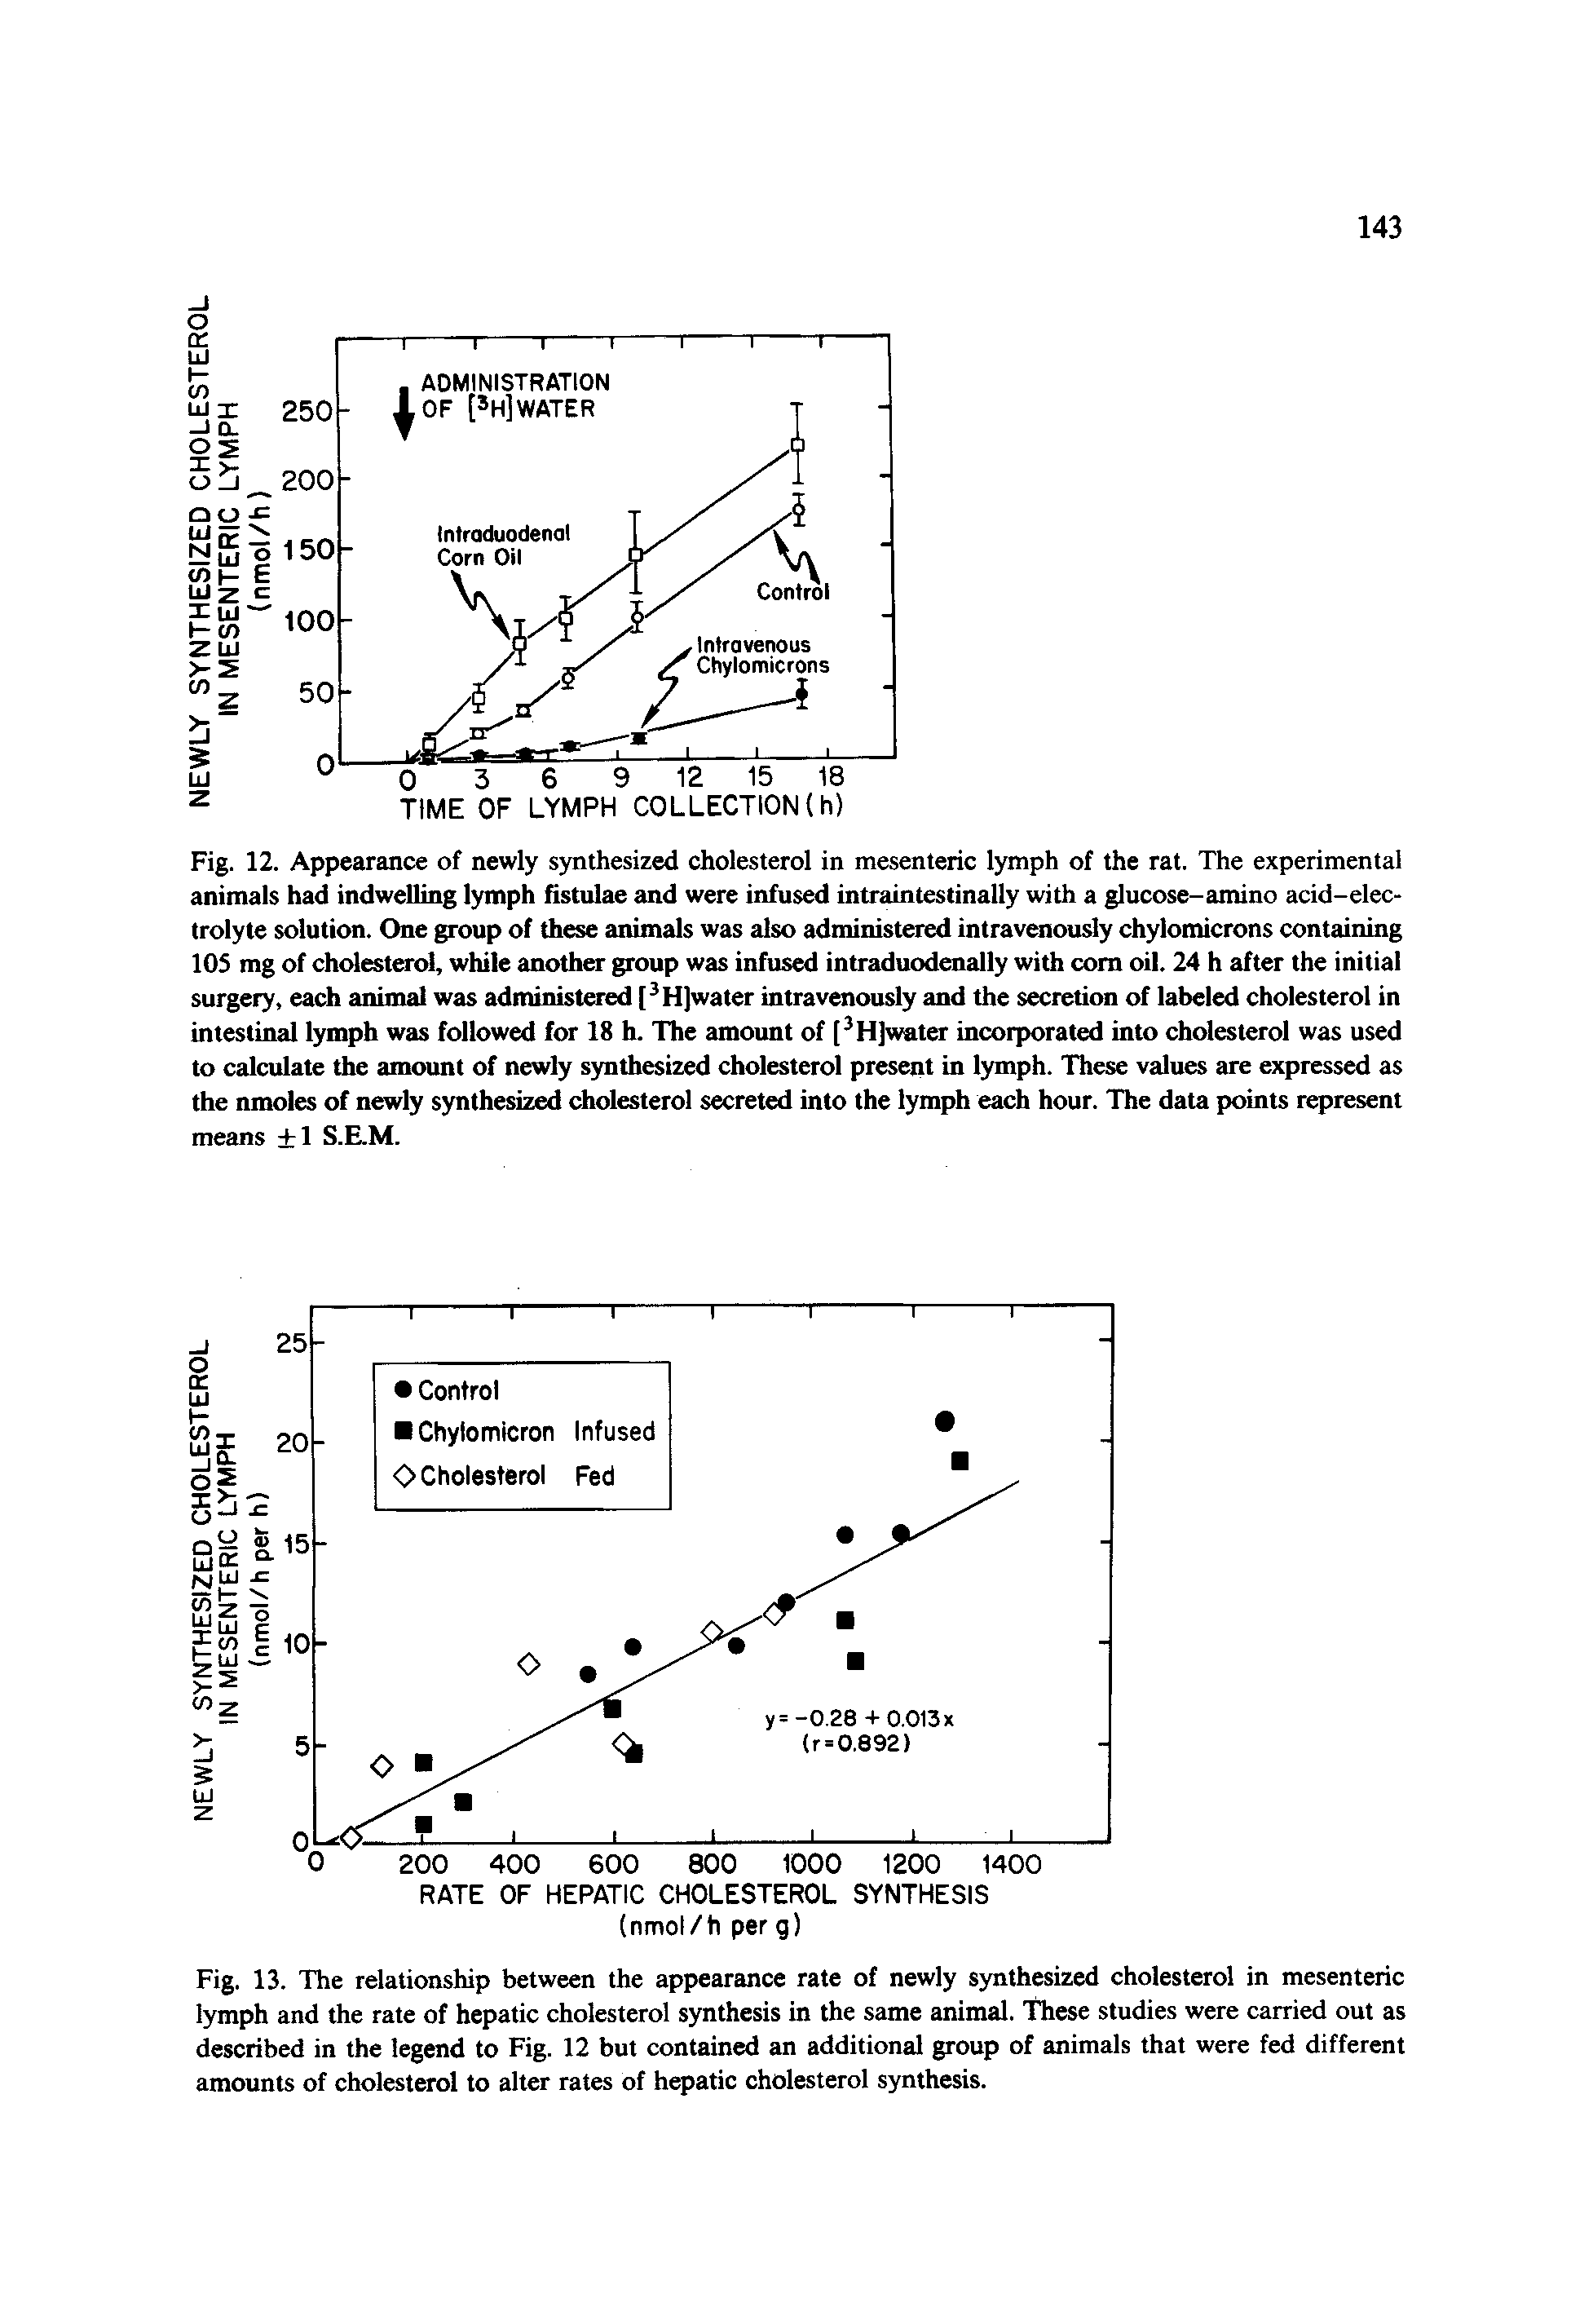 Fig. 13. The relationship between the appearance rate of newly synthesized cholesterol in mesenteric lymph and the rate of hepatic cholesterol synthesis in the same animal. These studies were carried out as described in the legend to Fig. 12 but contained an additional group of animals that were fed different amounts of cholesterol to alter rates of hepatic cholesterol synthesis.